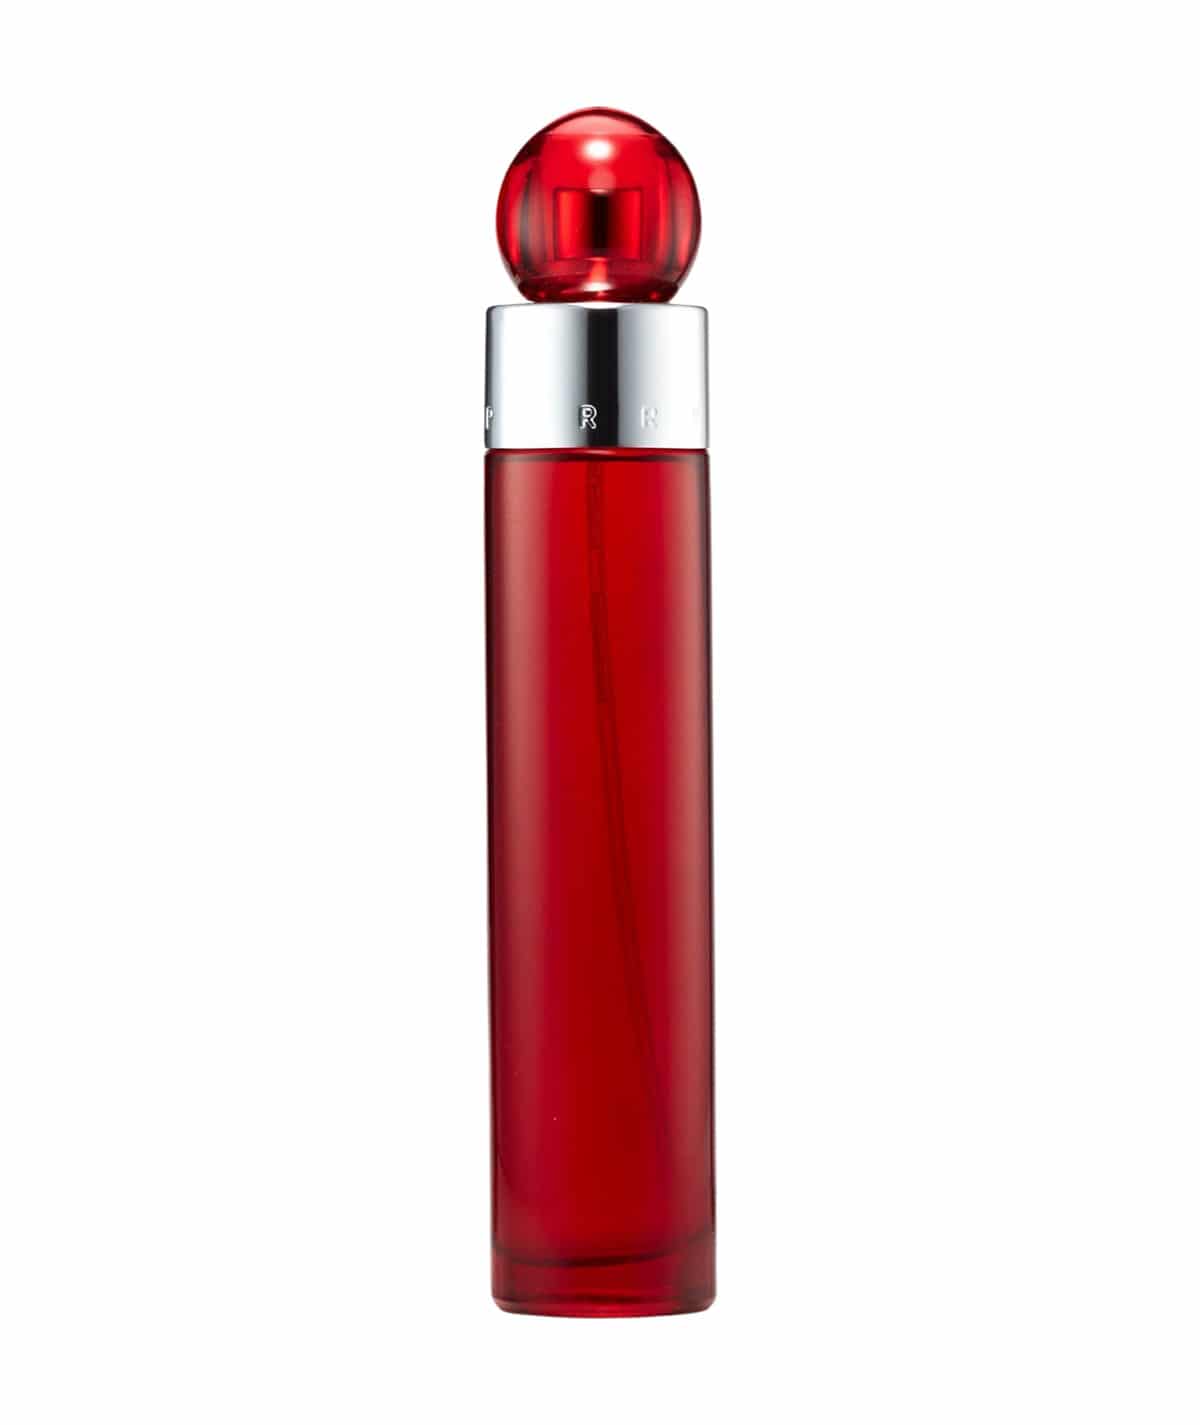 Perfumes In A Red Bottle - FragranceReview.com